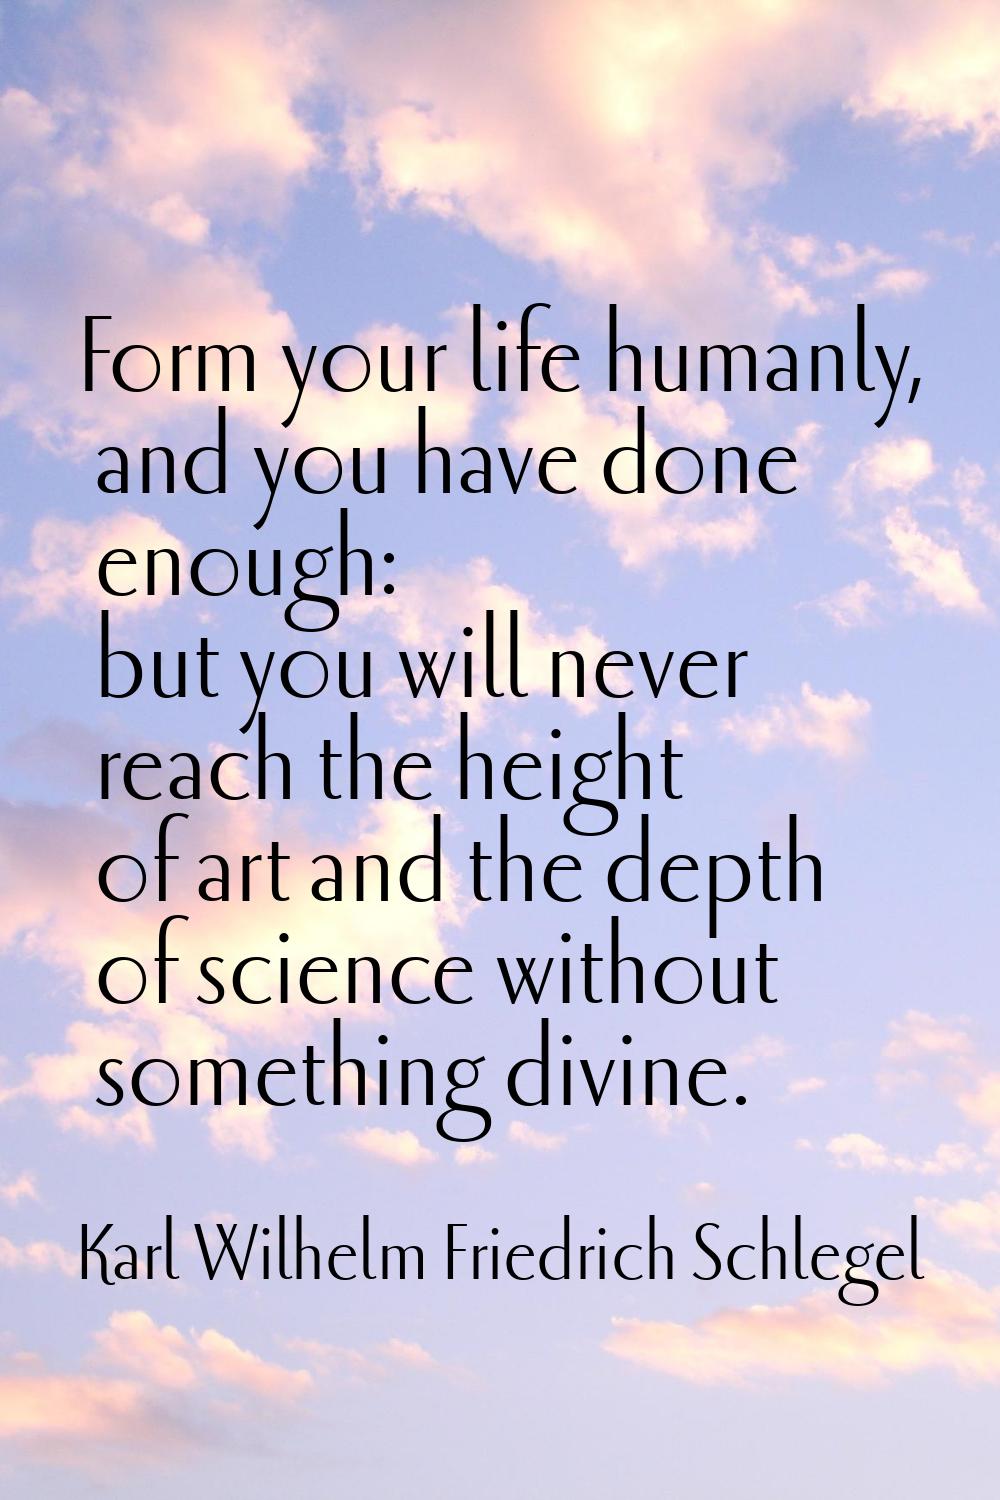 Form your life humanly, and you have done enough: but you will never reach the height of art and th